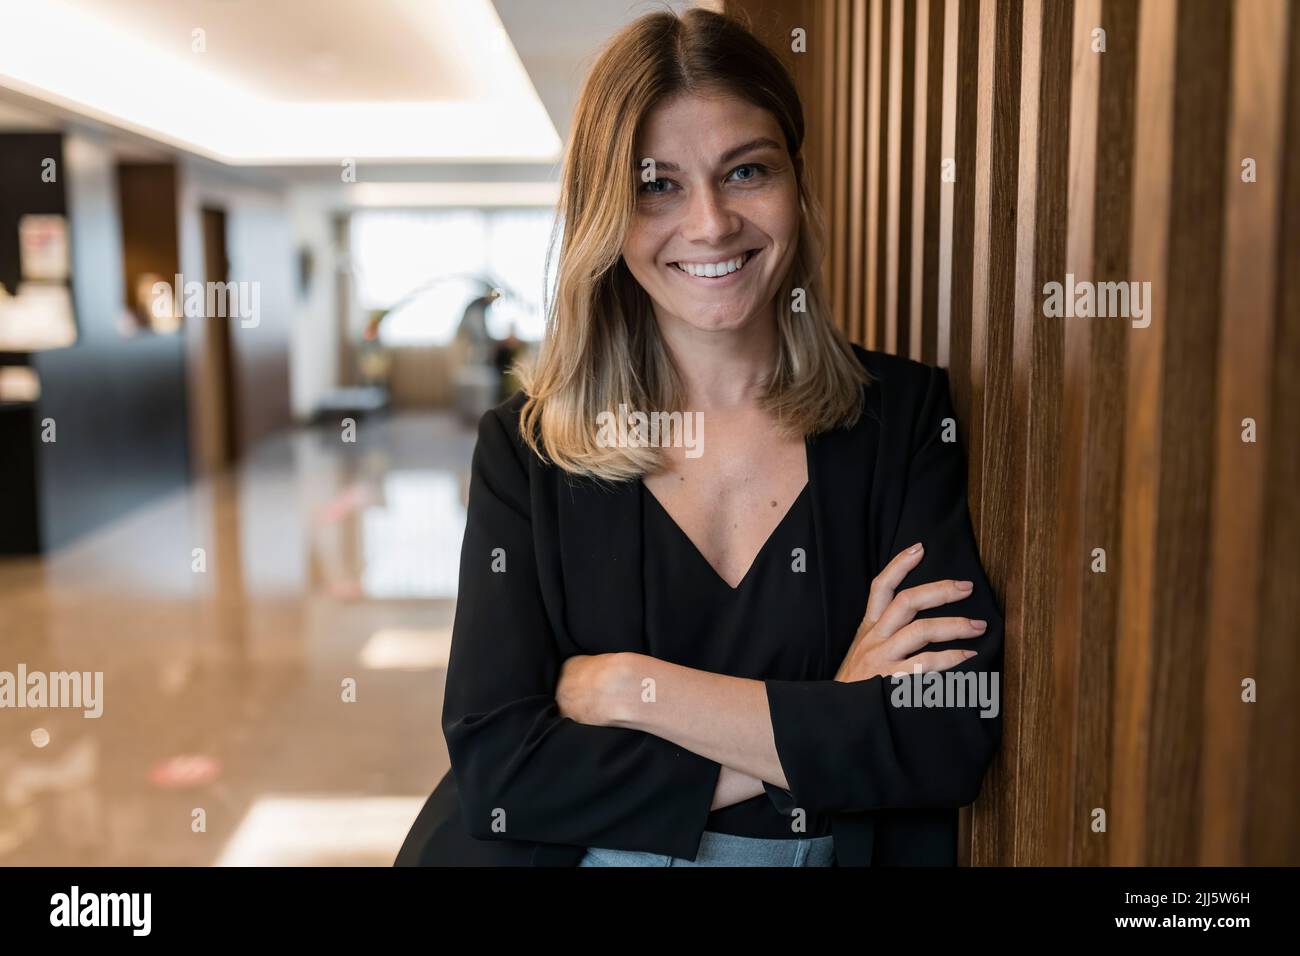 Smiling businesswoman with arms crossed standing by wooden wall at hotel Stock Photo